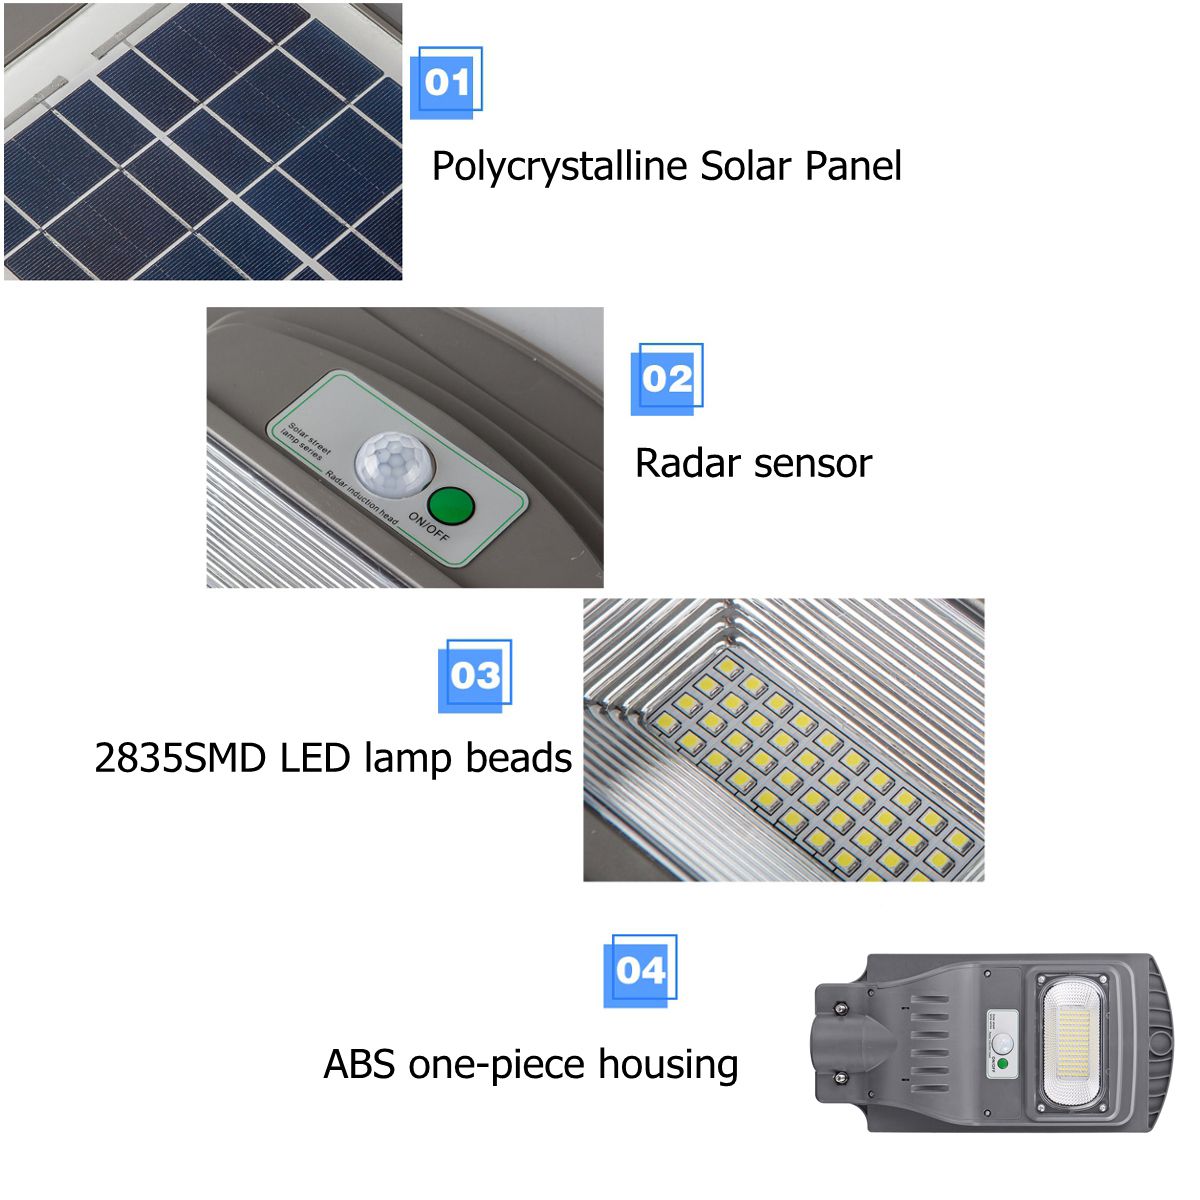 Bakeey-120W-240W-360W-Solar-Energy-Human-Body-Induction-LED-Lights-Courtyard-Outdoor-Street-Wall-Lam-1590907